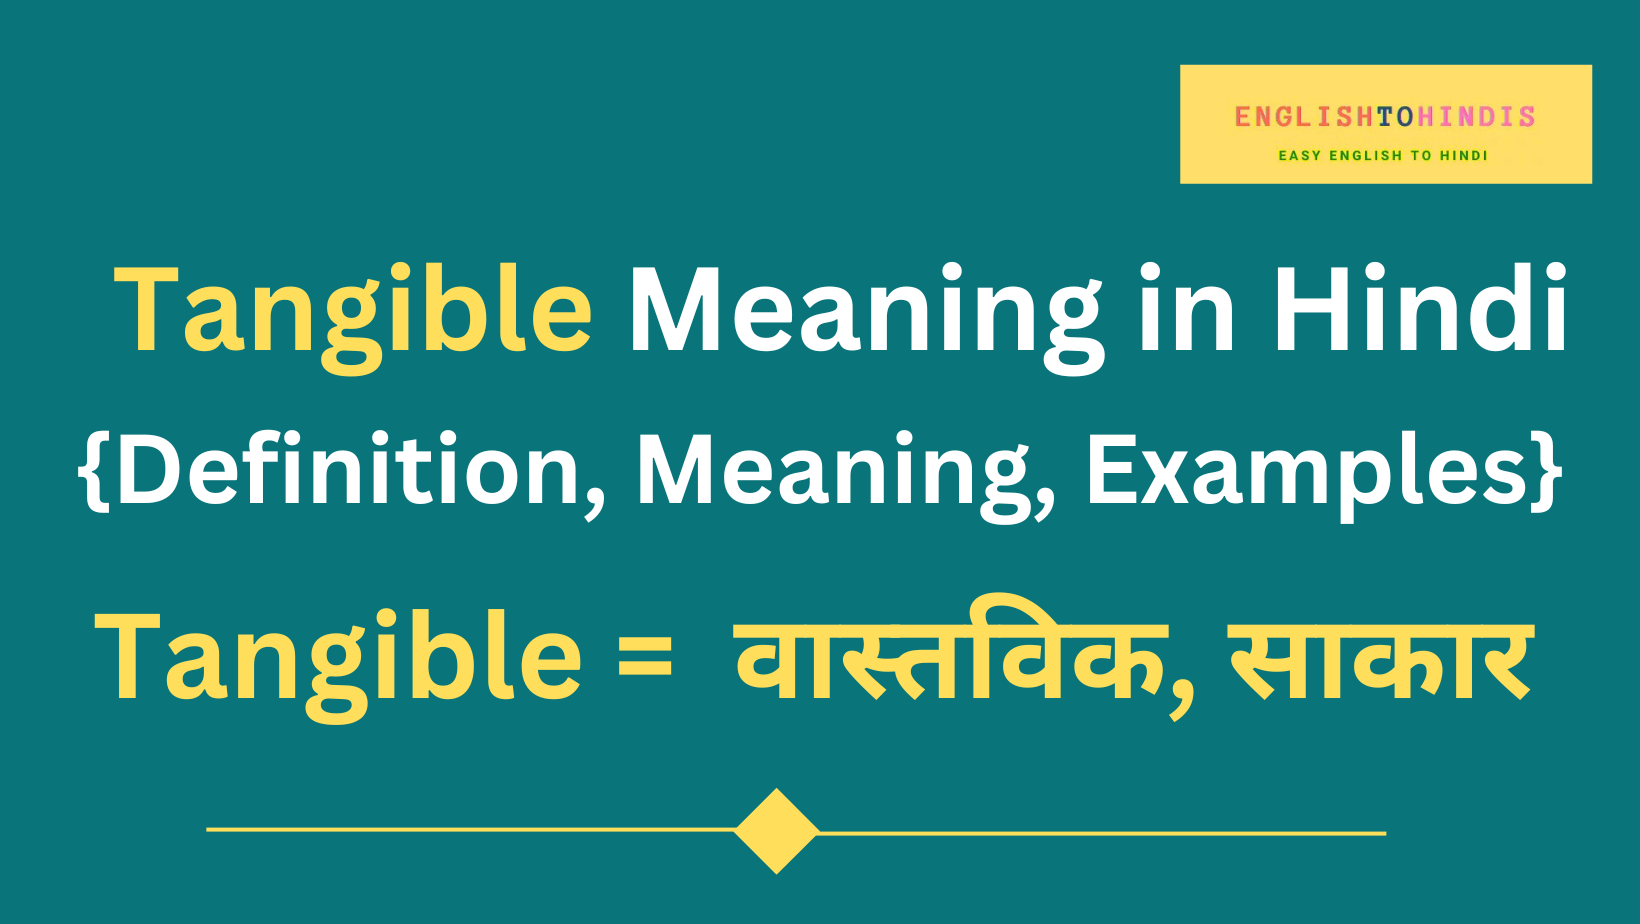 Tangible Meaning in Hindi